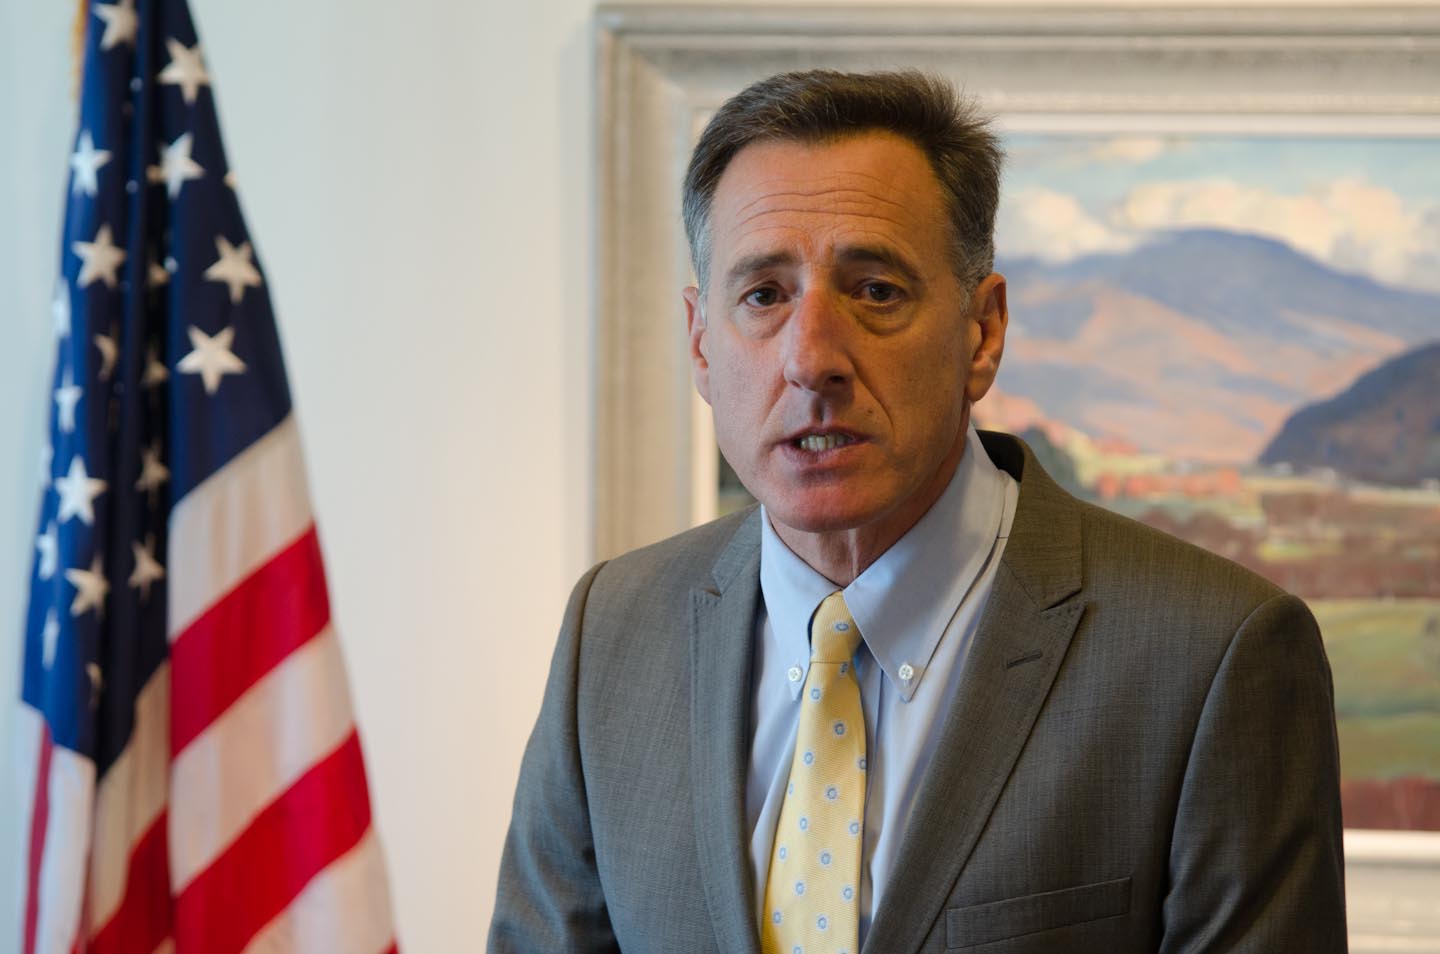 Peter Shumlin Governor of Vermont